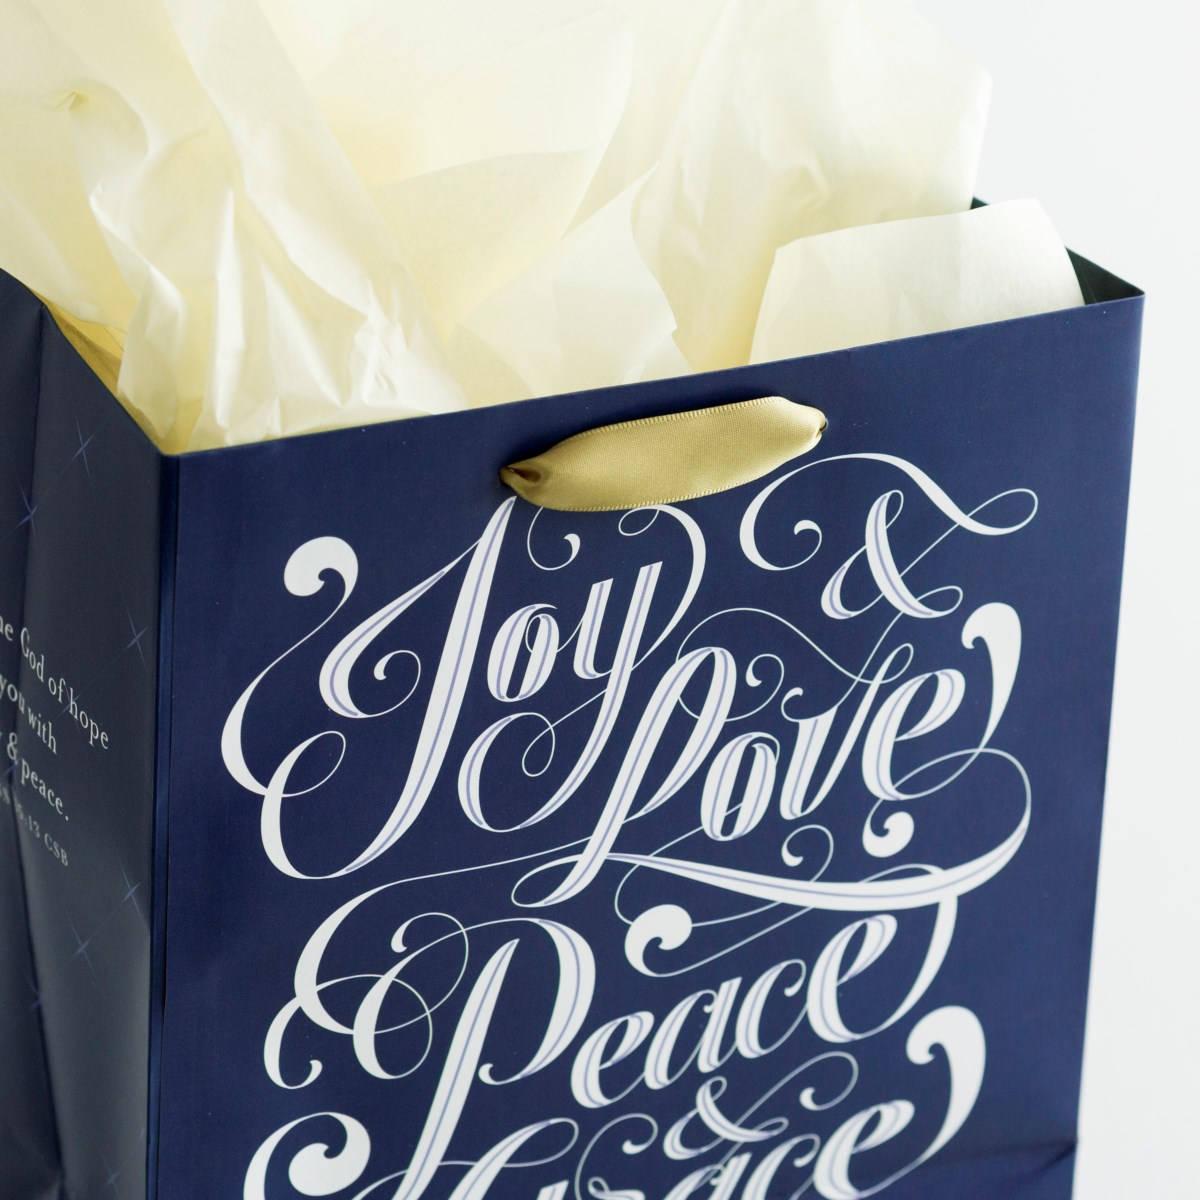 Joy and Love - Medium Gift Bag with Tissue Paper - 145 Units - Bulk Discount